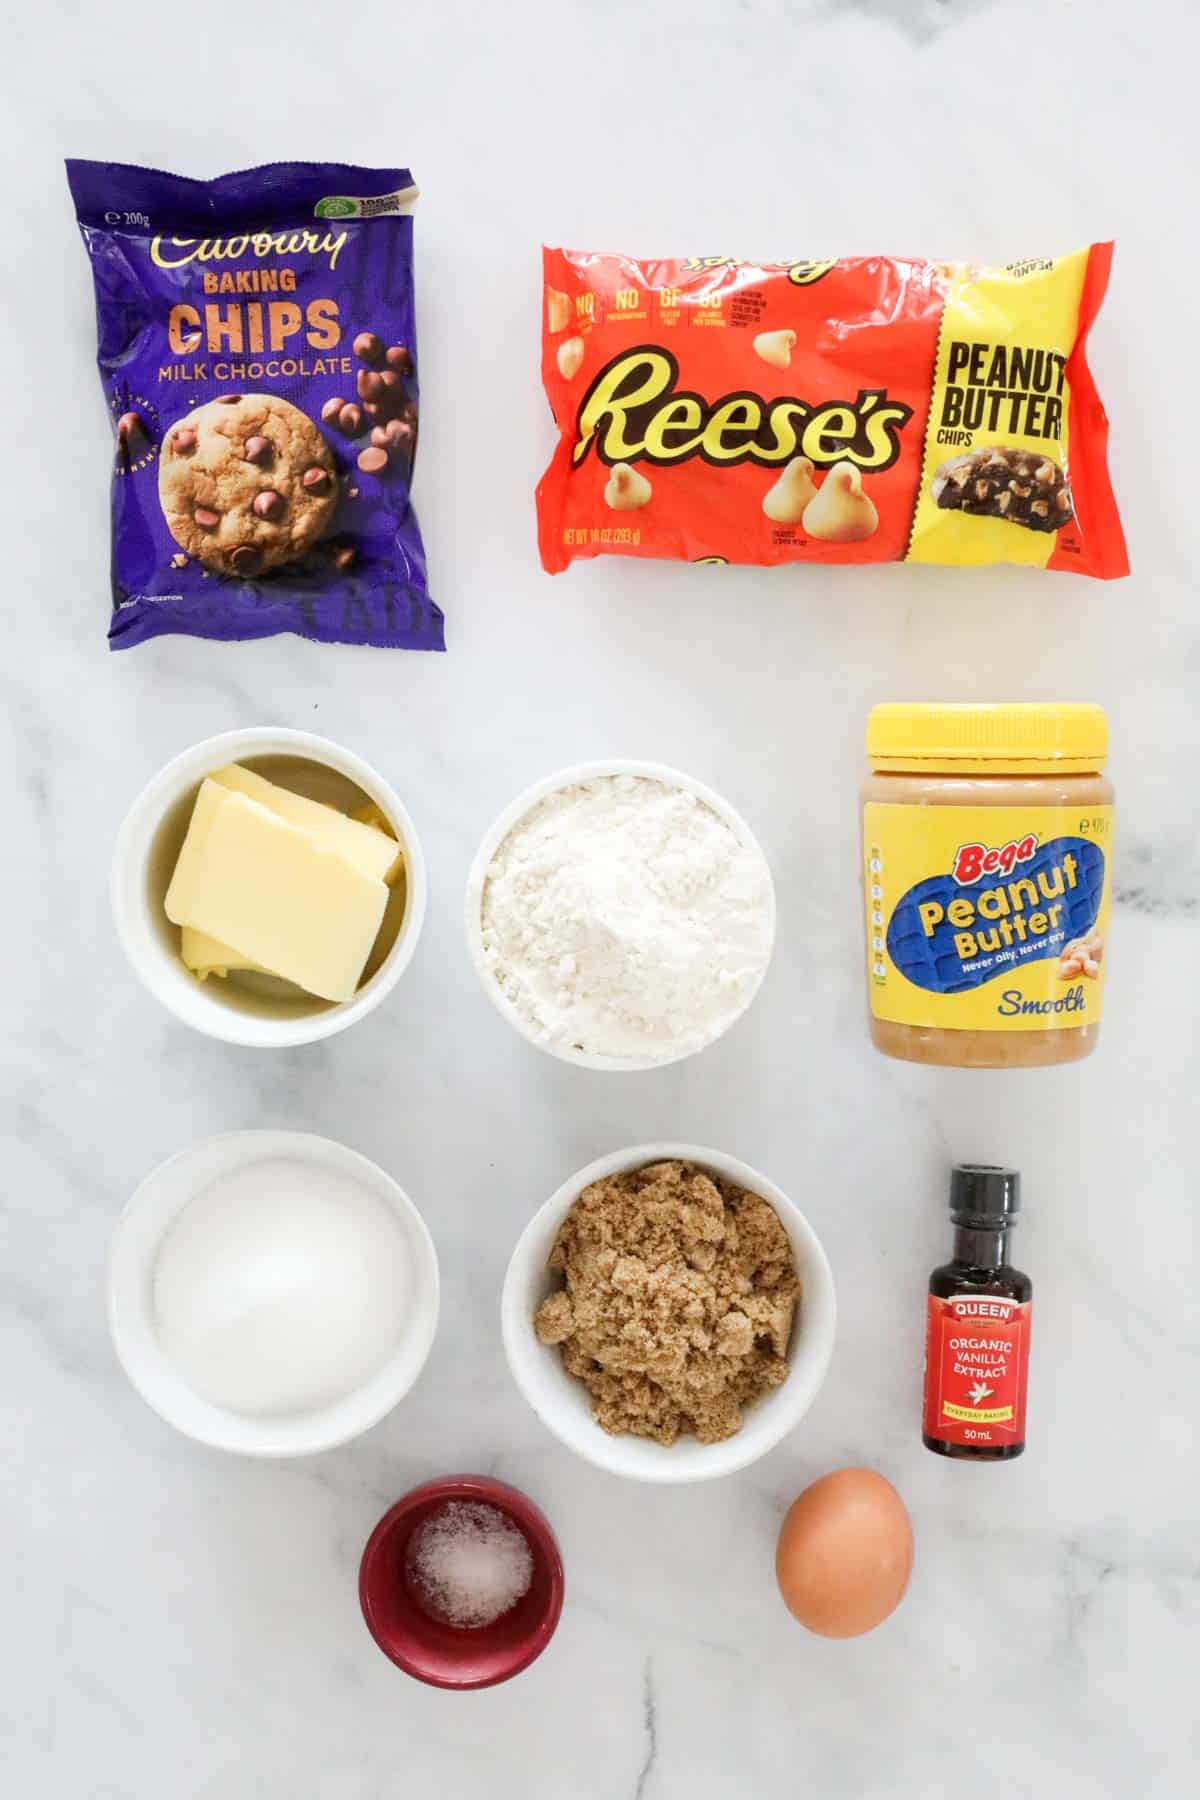 Ingredients needed to make the cookies weighed out and placed in individual bowls.